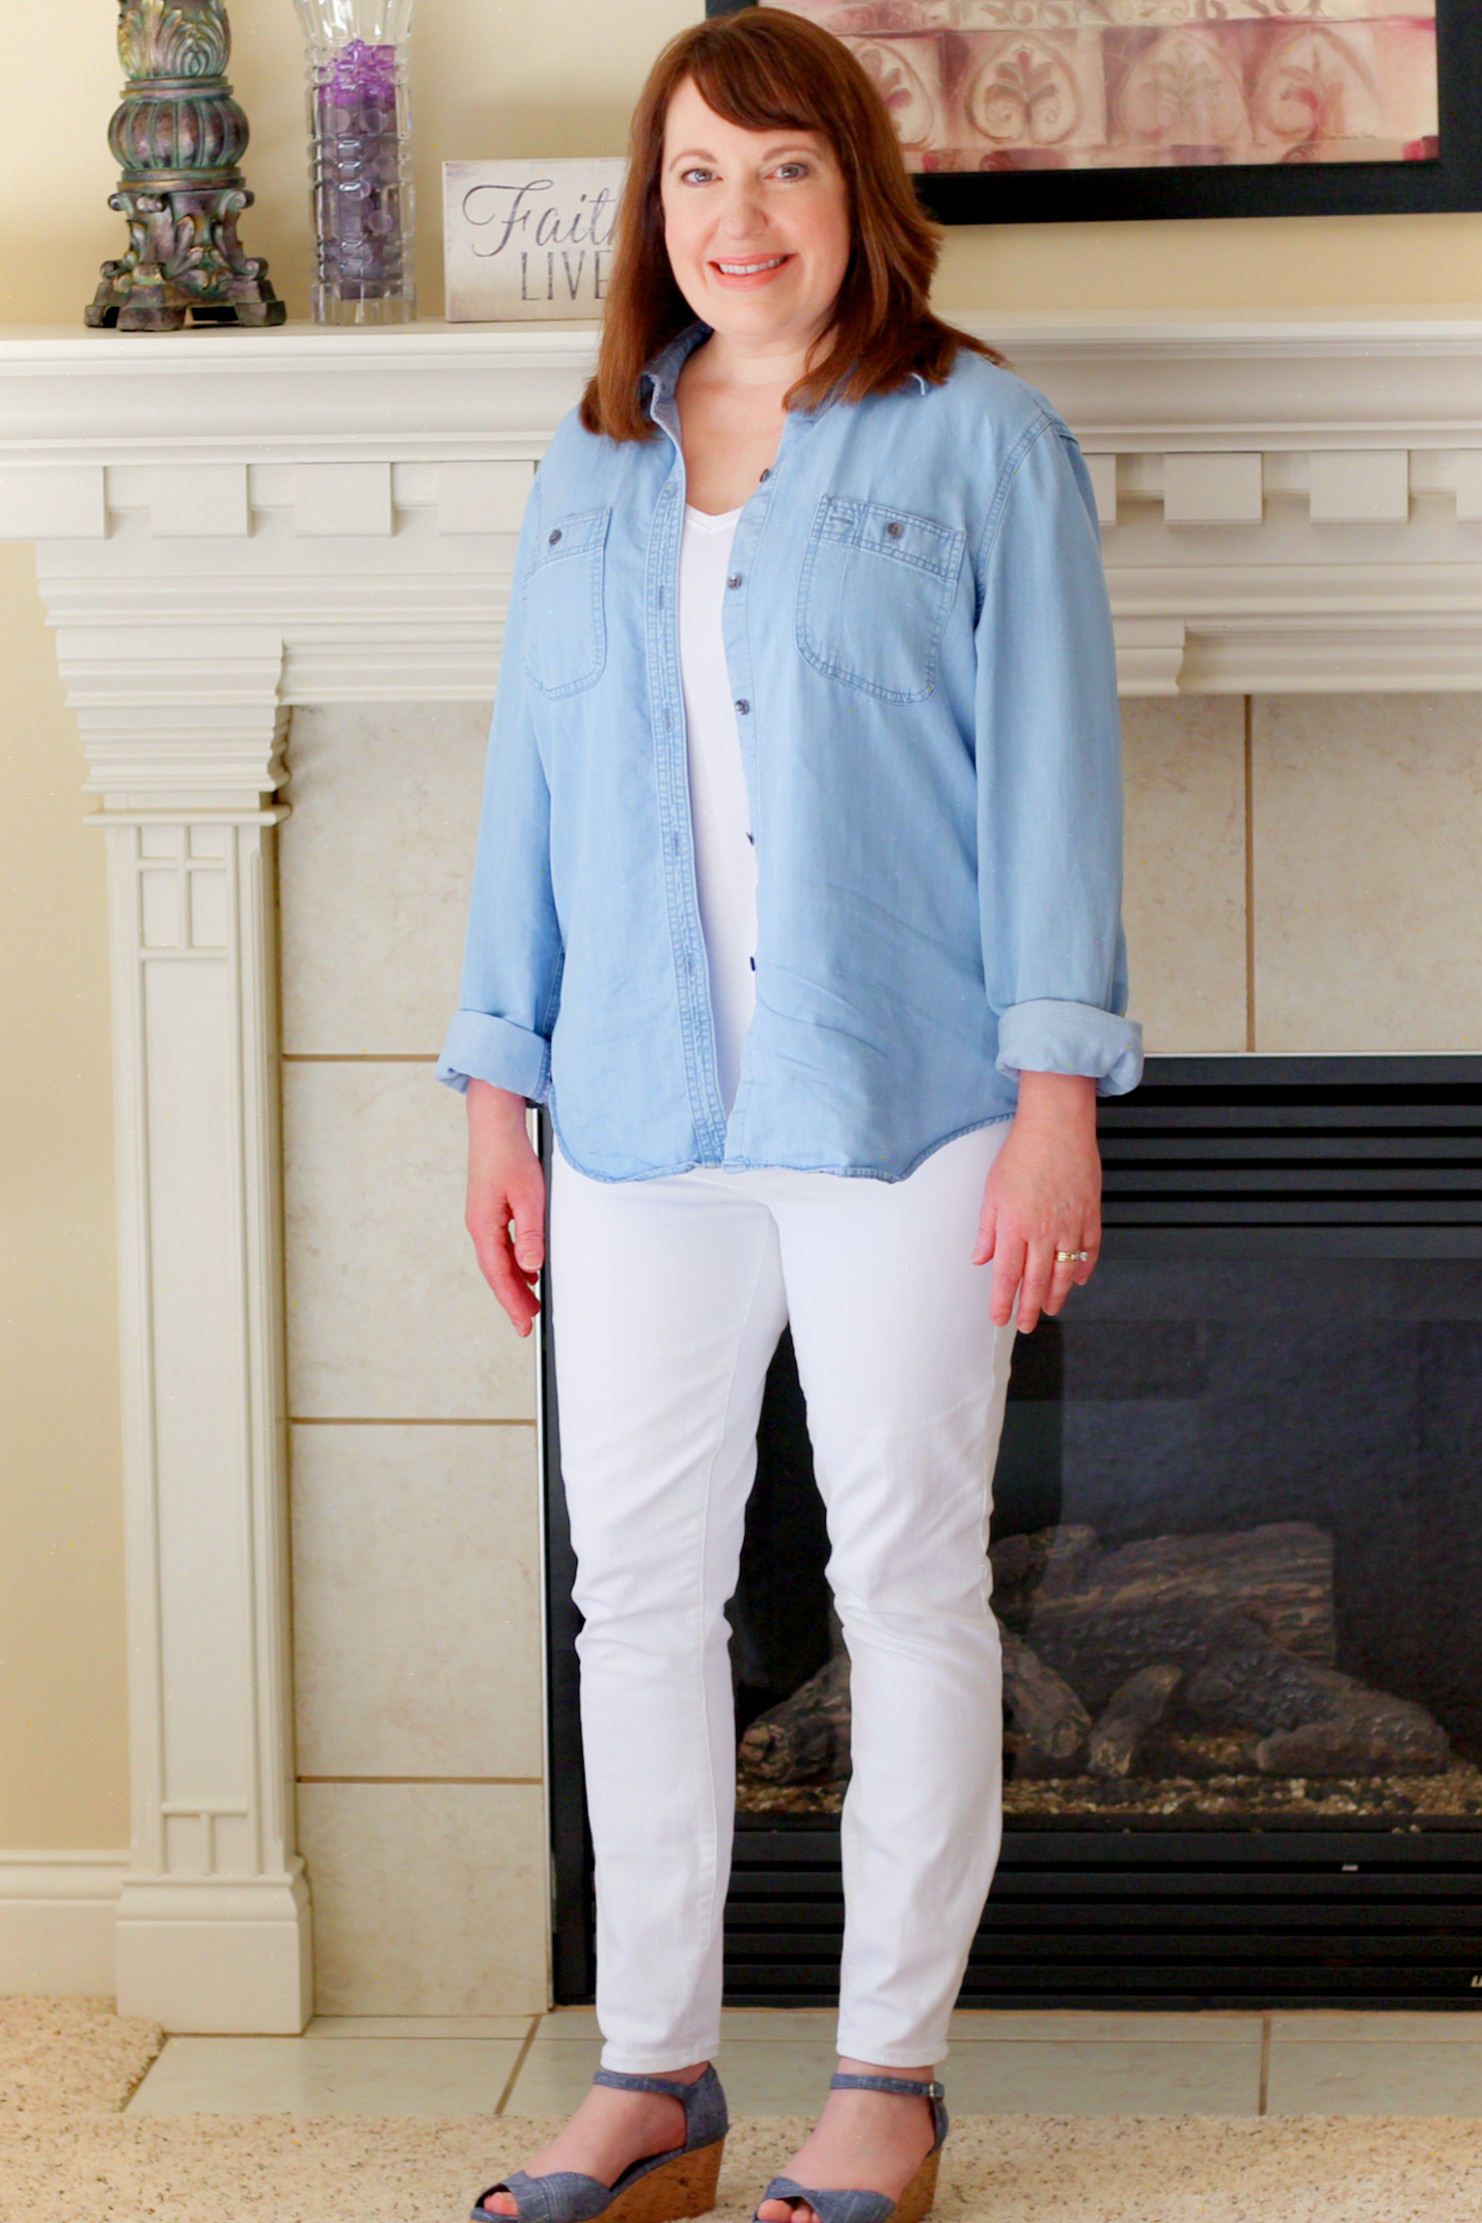 With chambray shirt and white pumps